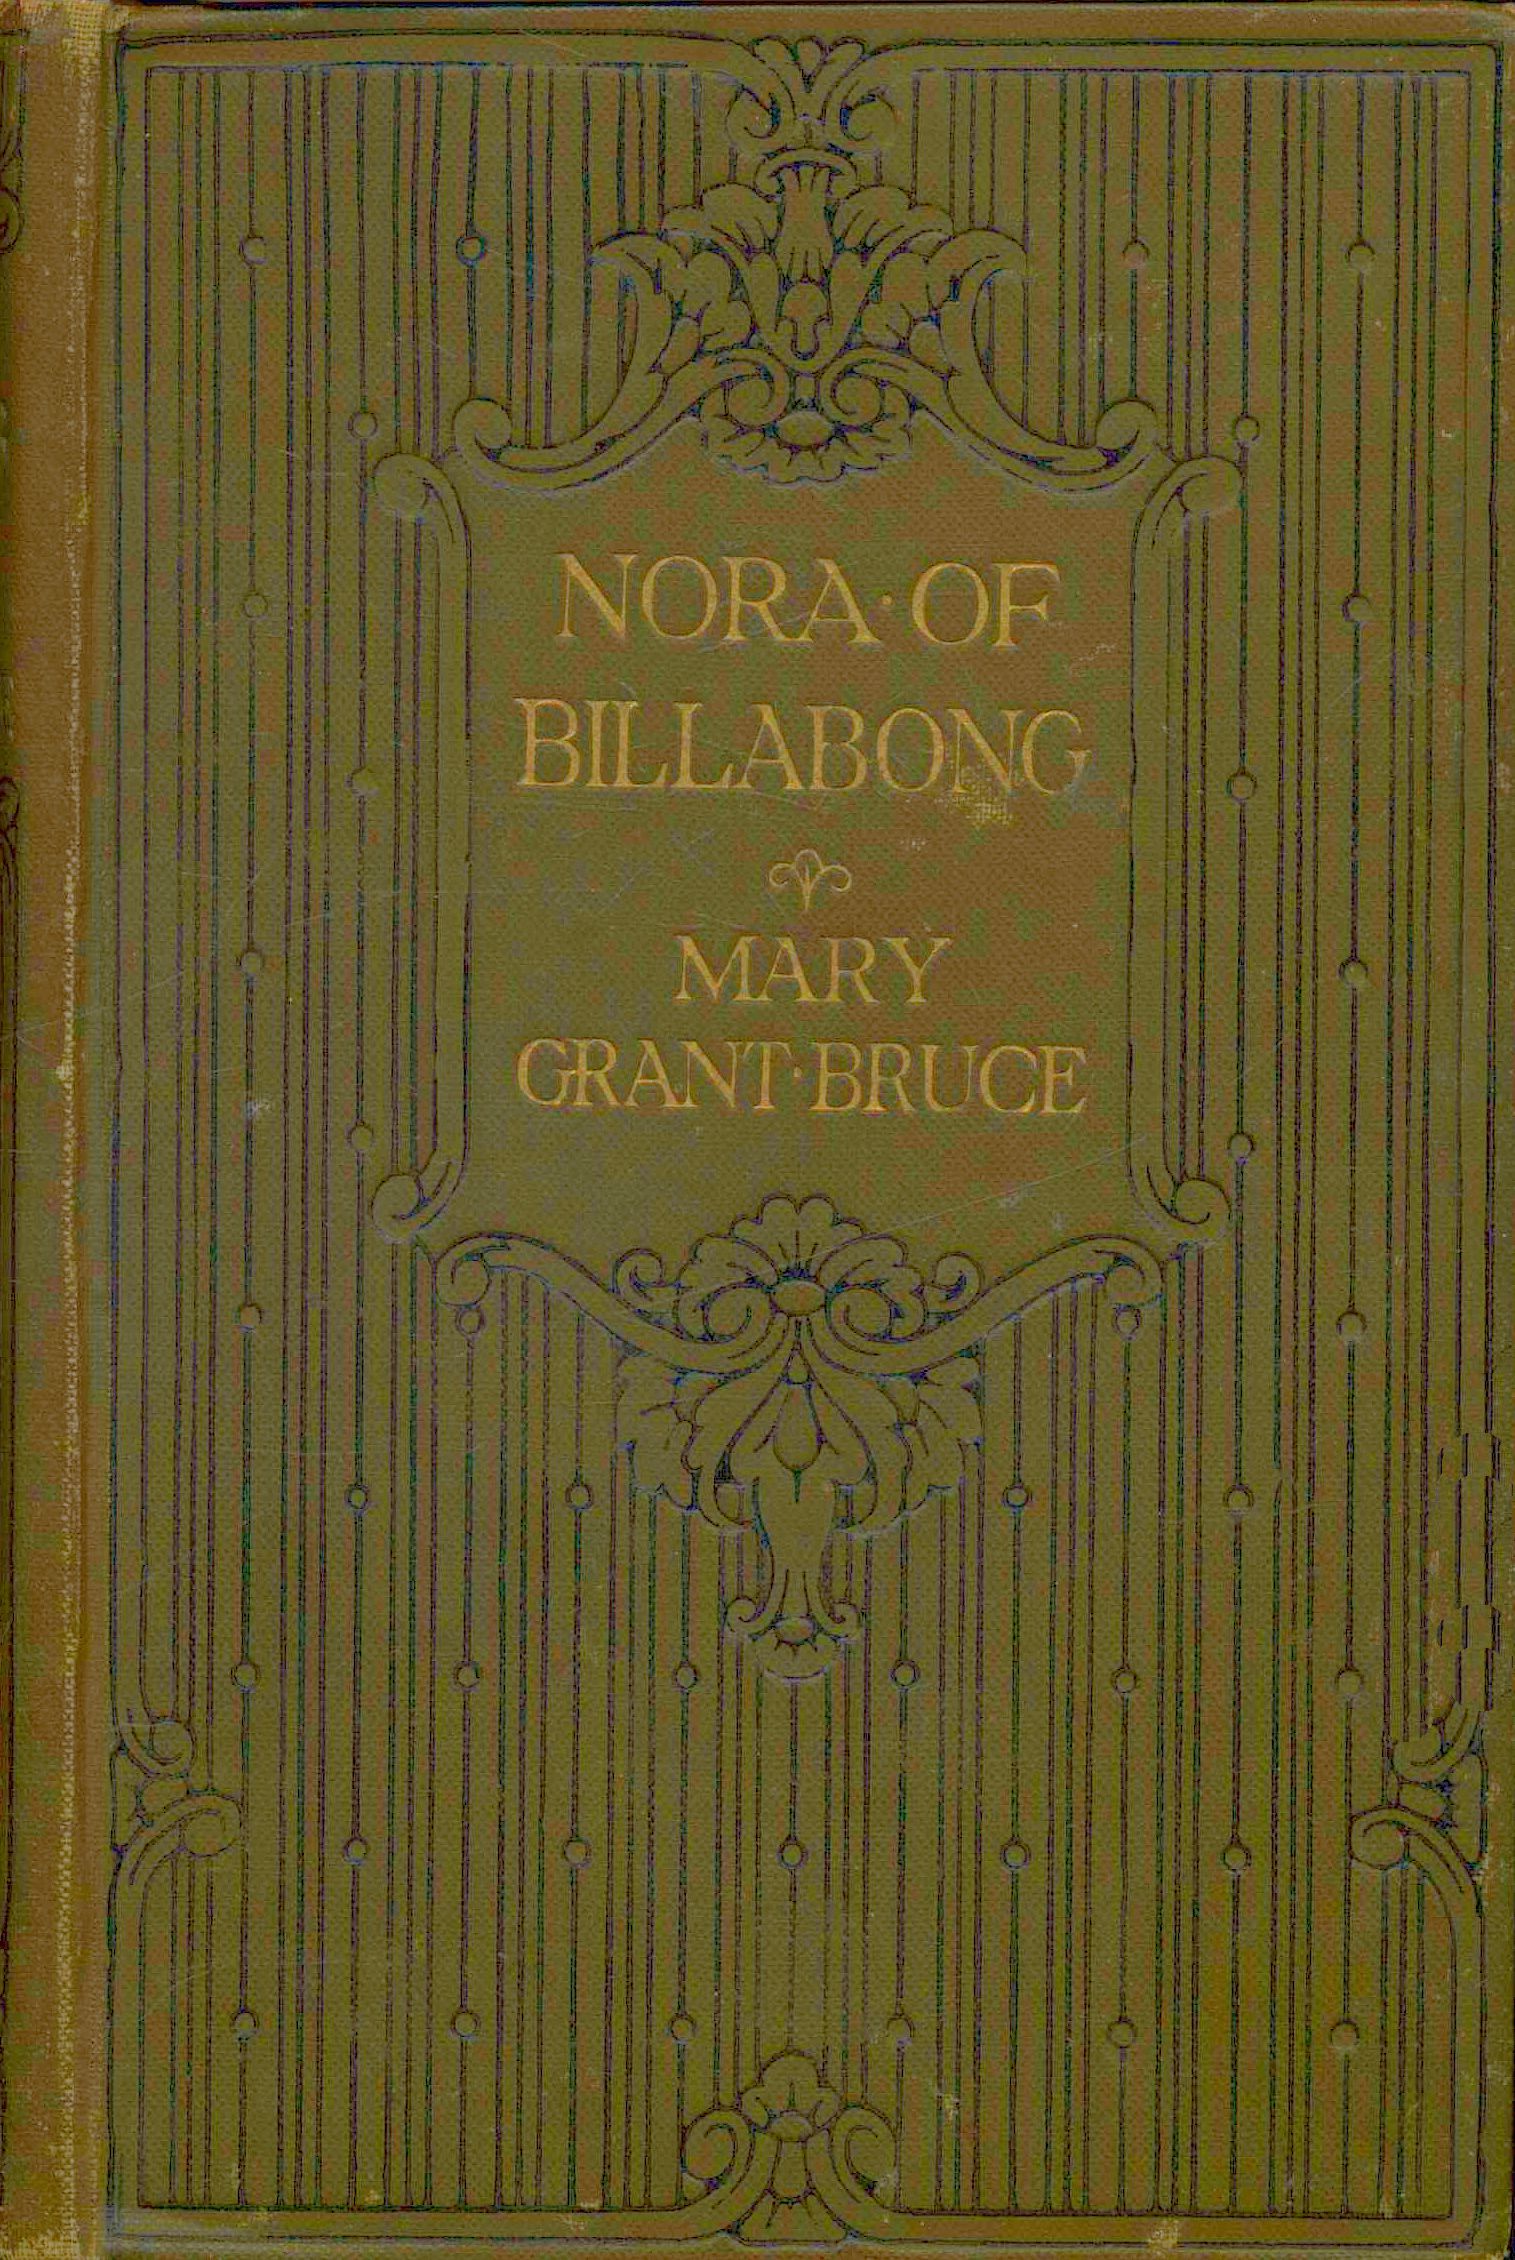 Gutenberg Norah Billabong The Bruce eBook Grant of by Project Mary of